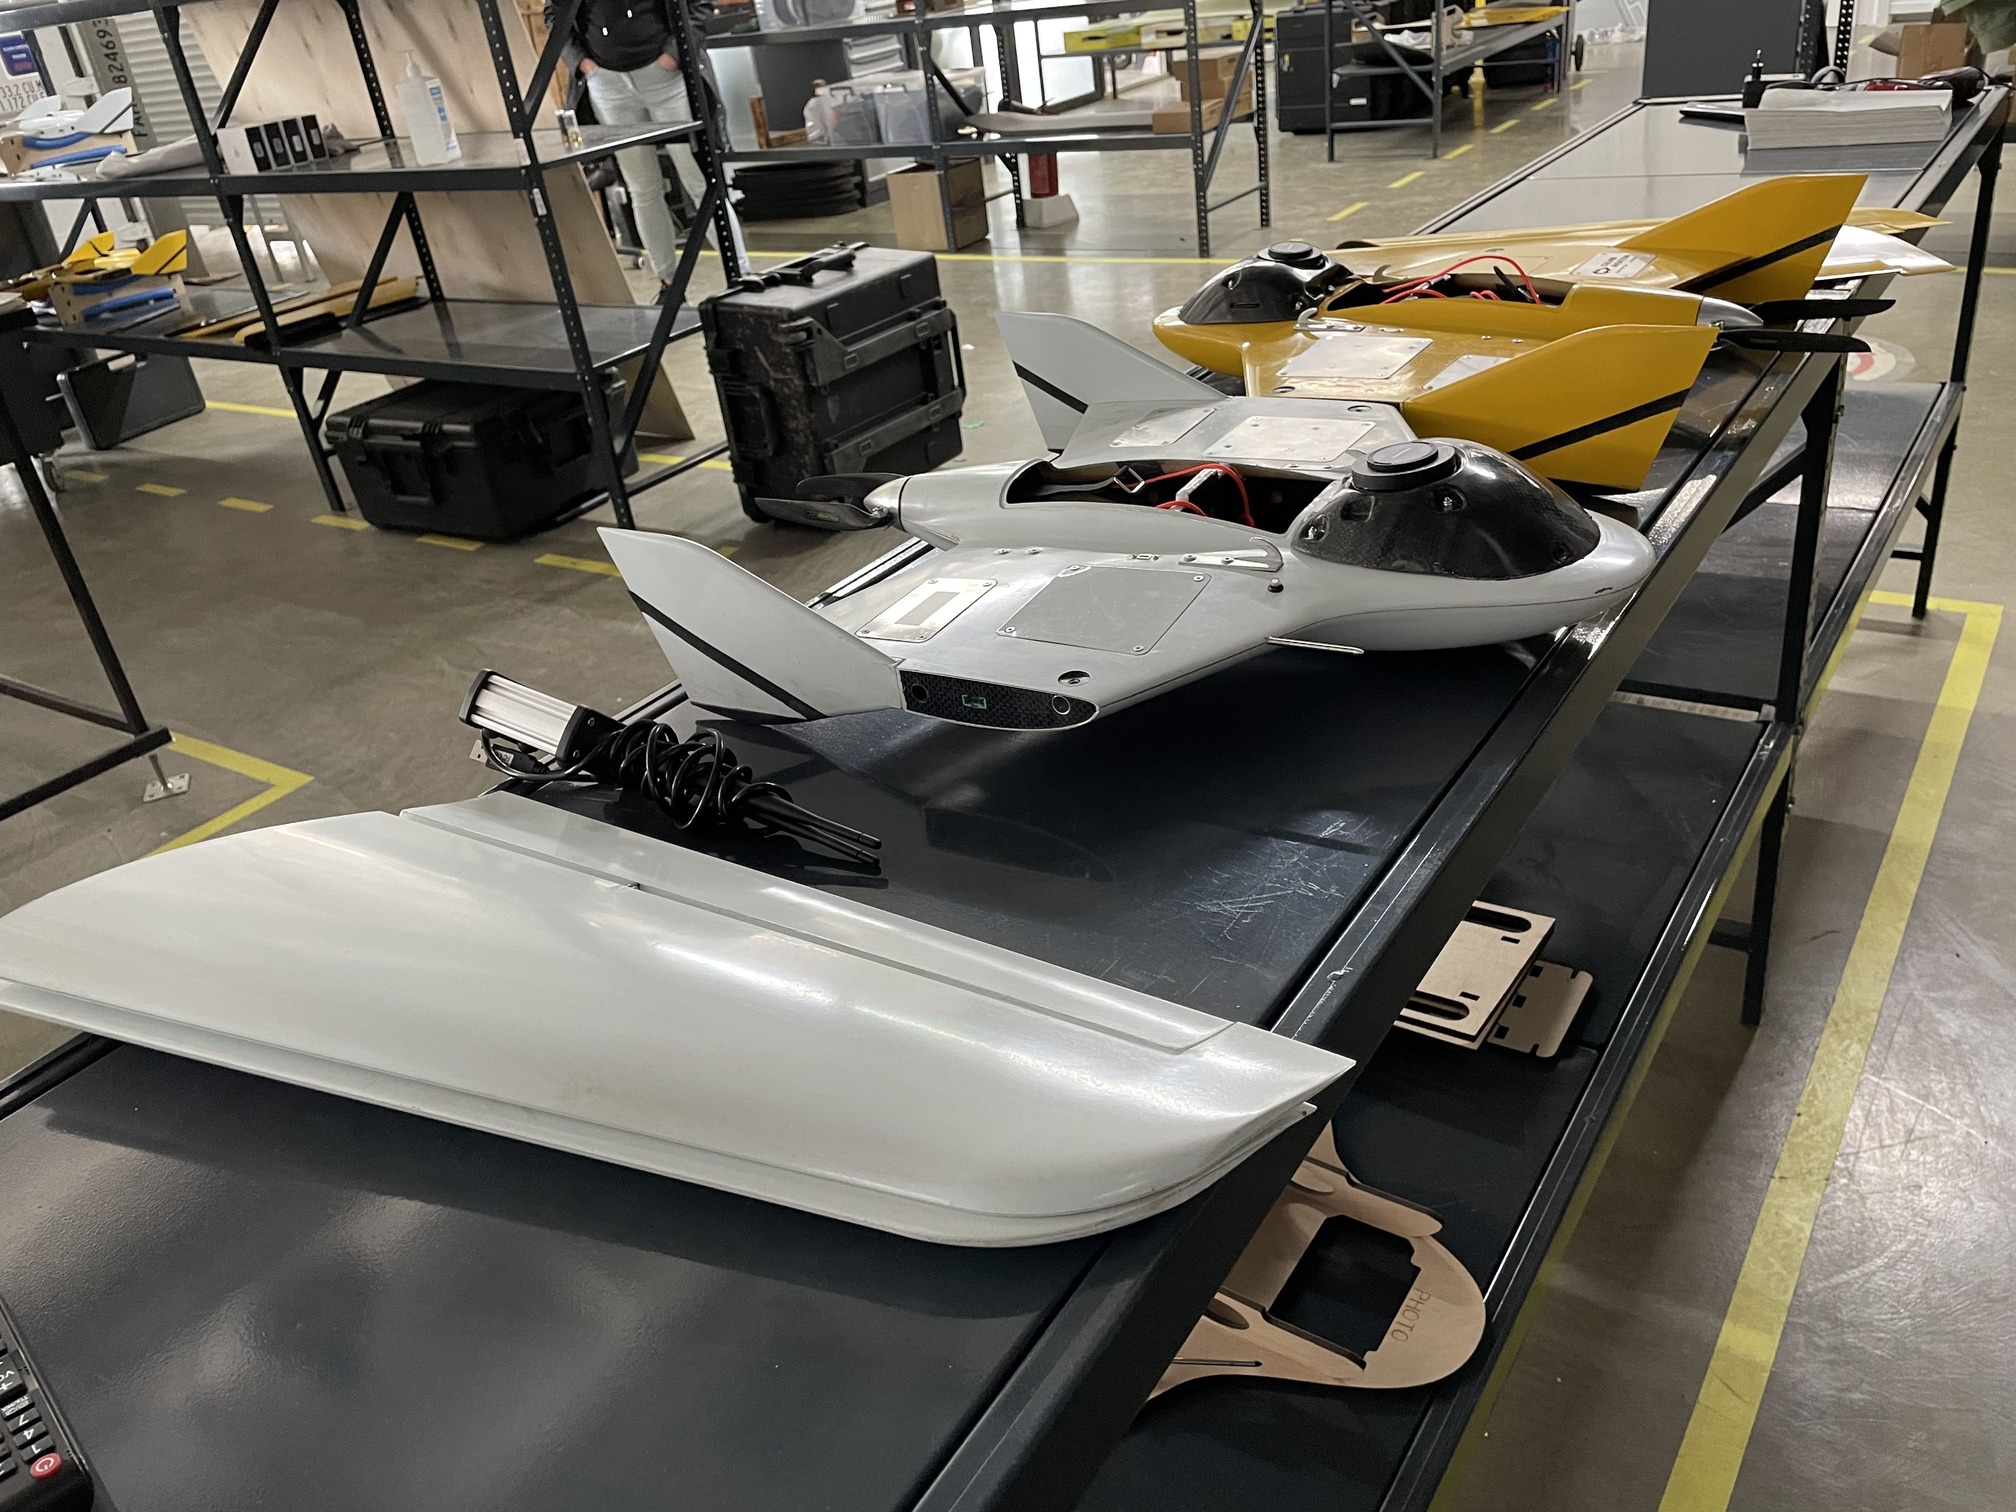 Culver Aviation handed over two SKIF UAVs of its own production worth $50,000 (UAH 1.45 million) to the defenders of Ukraine